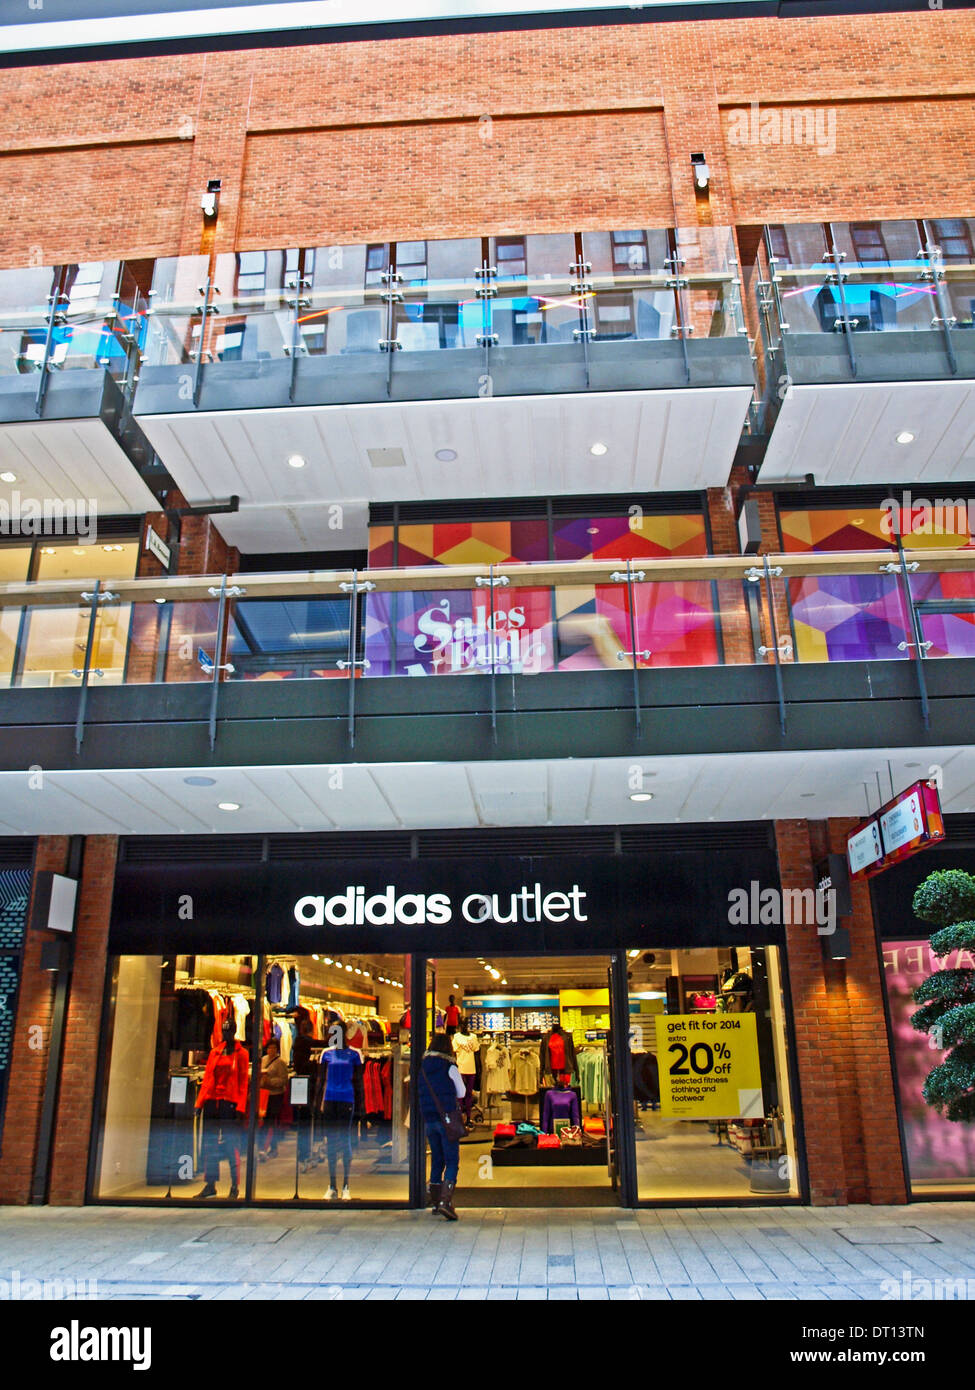 outlet adidas london